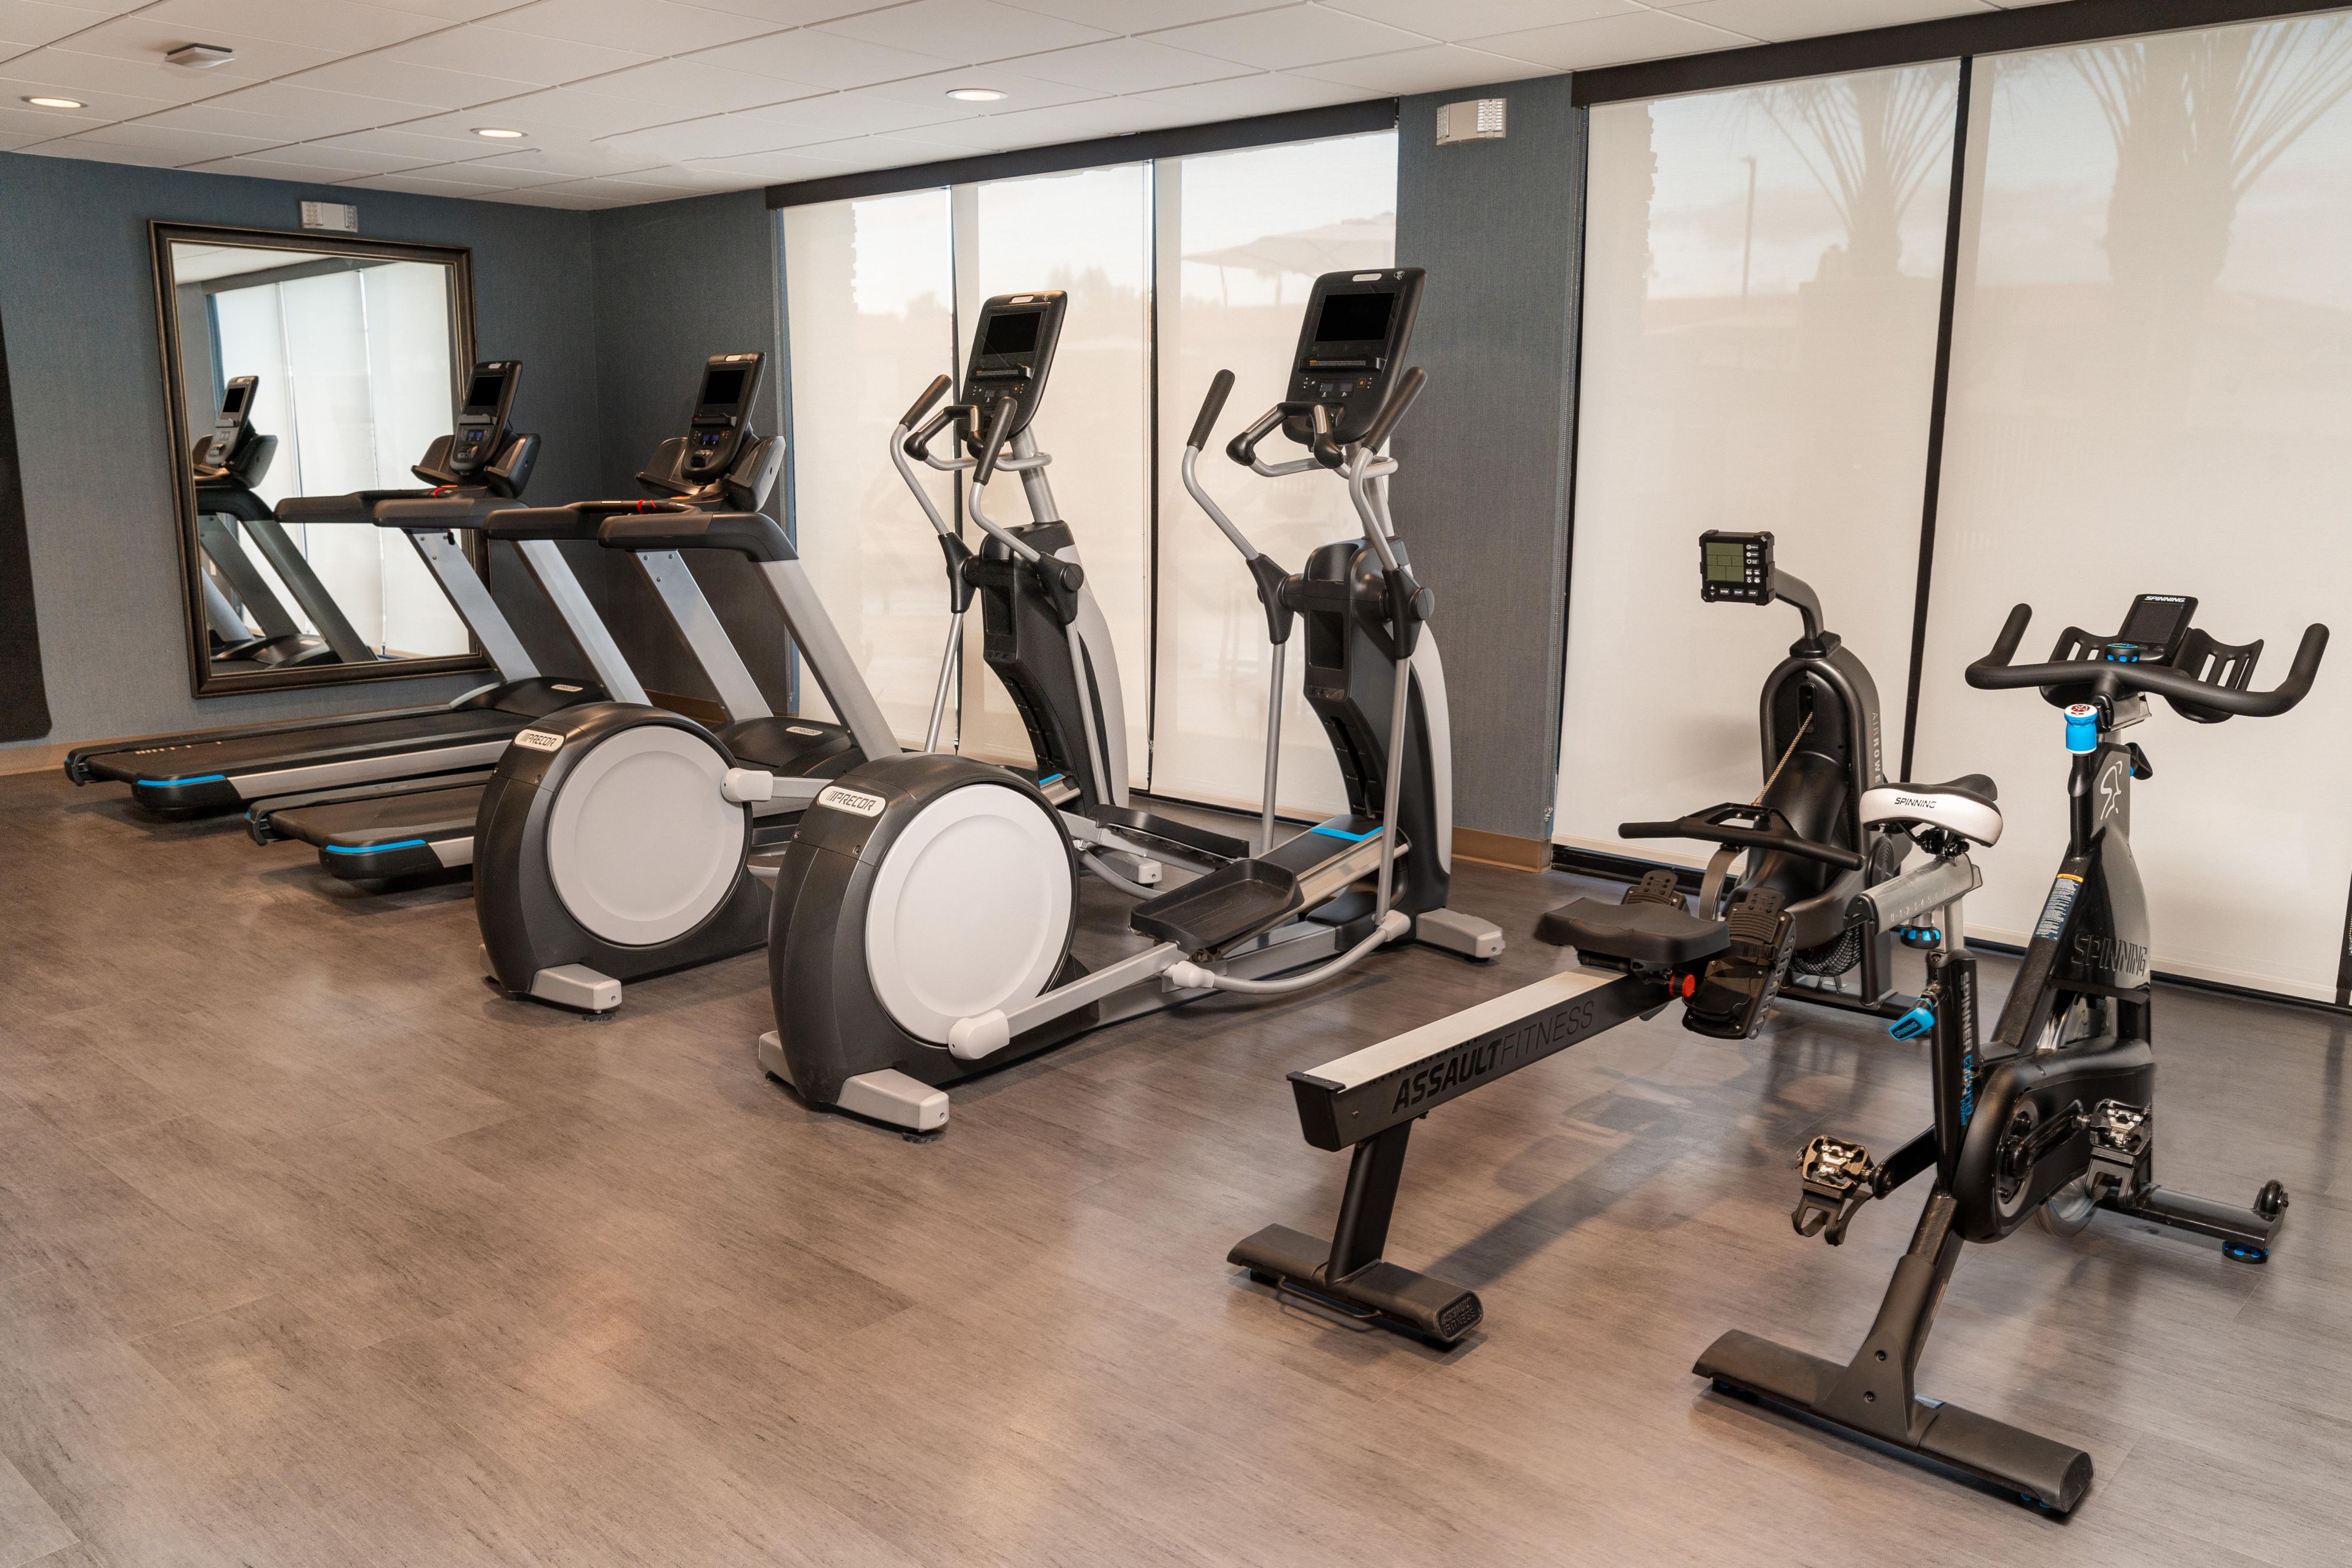 Break a sweat and turbocharge in our upscale modern fitness center with state-of-the-art strength training equipment, cardio machines and free weights.